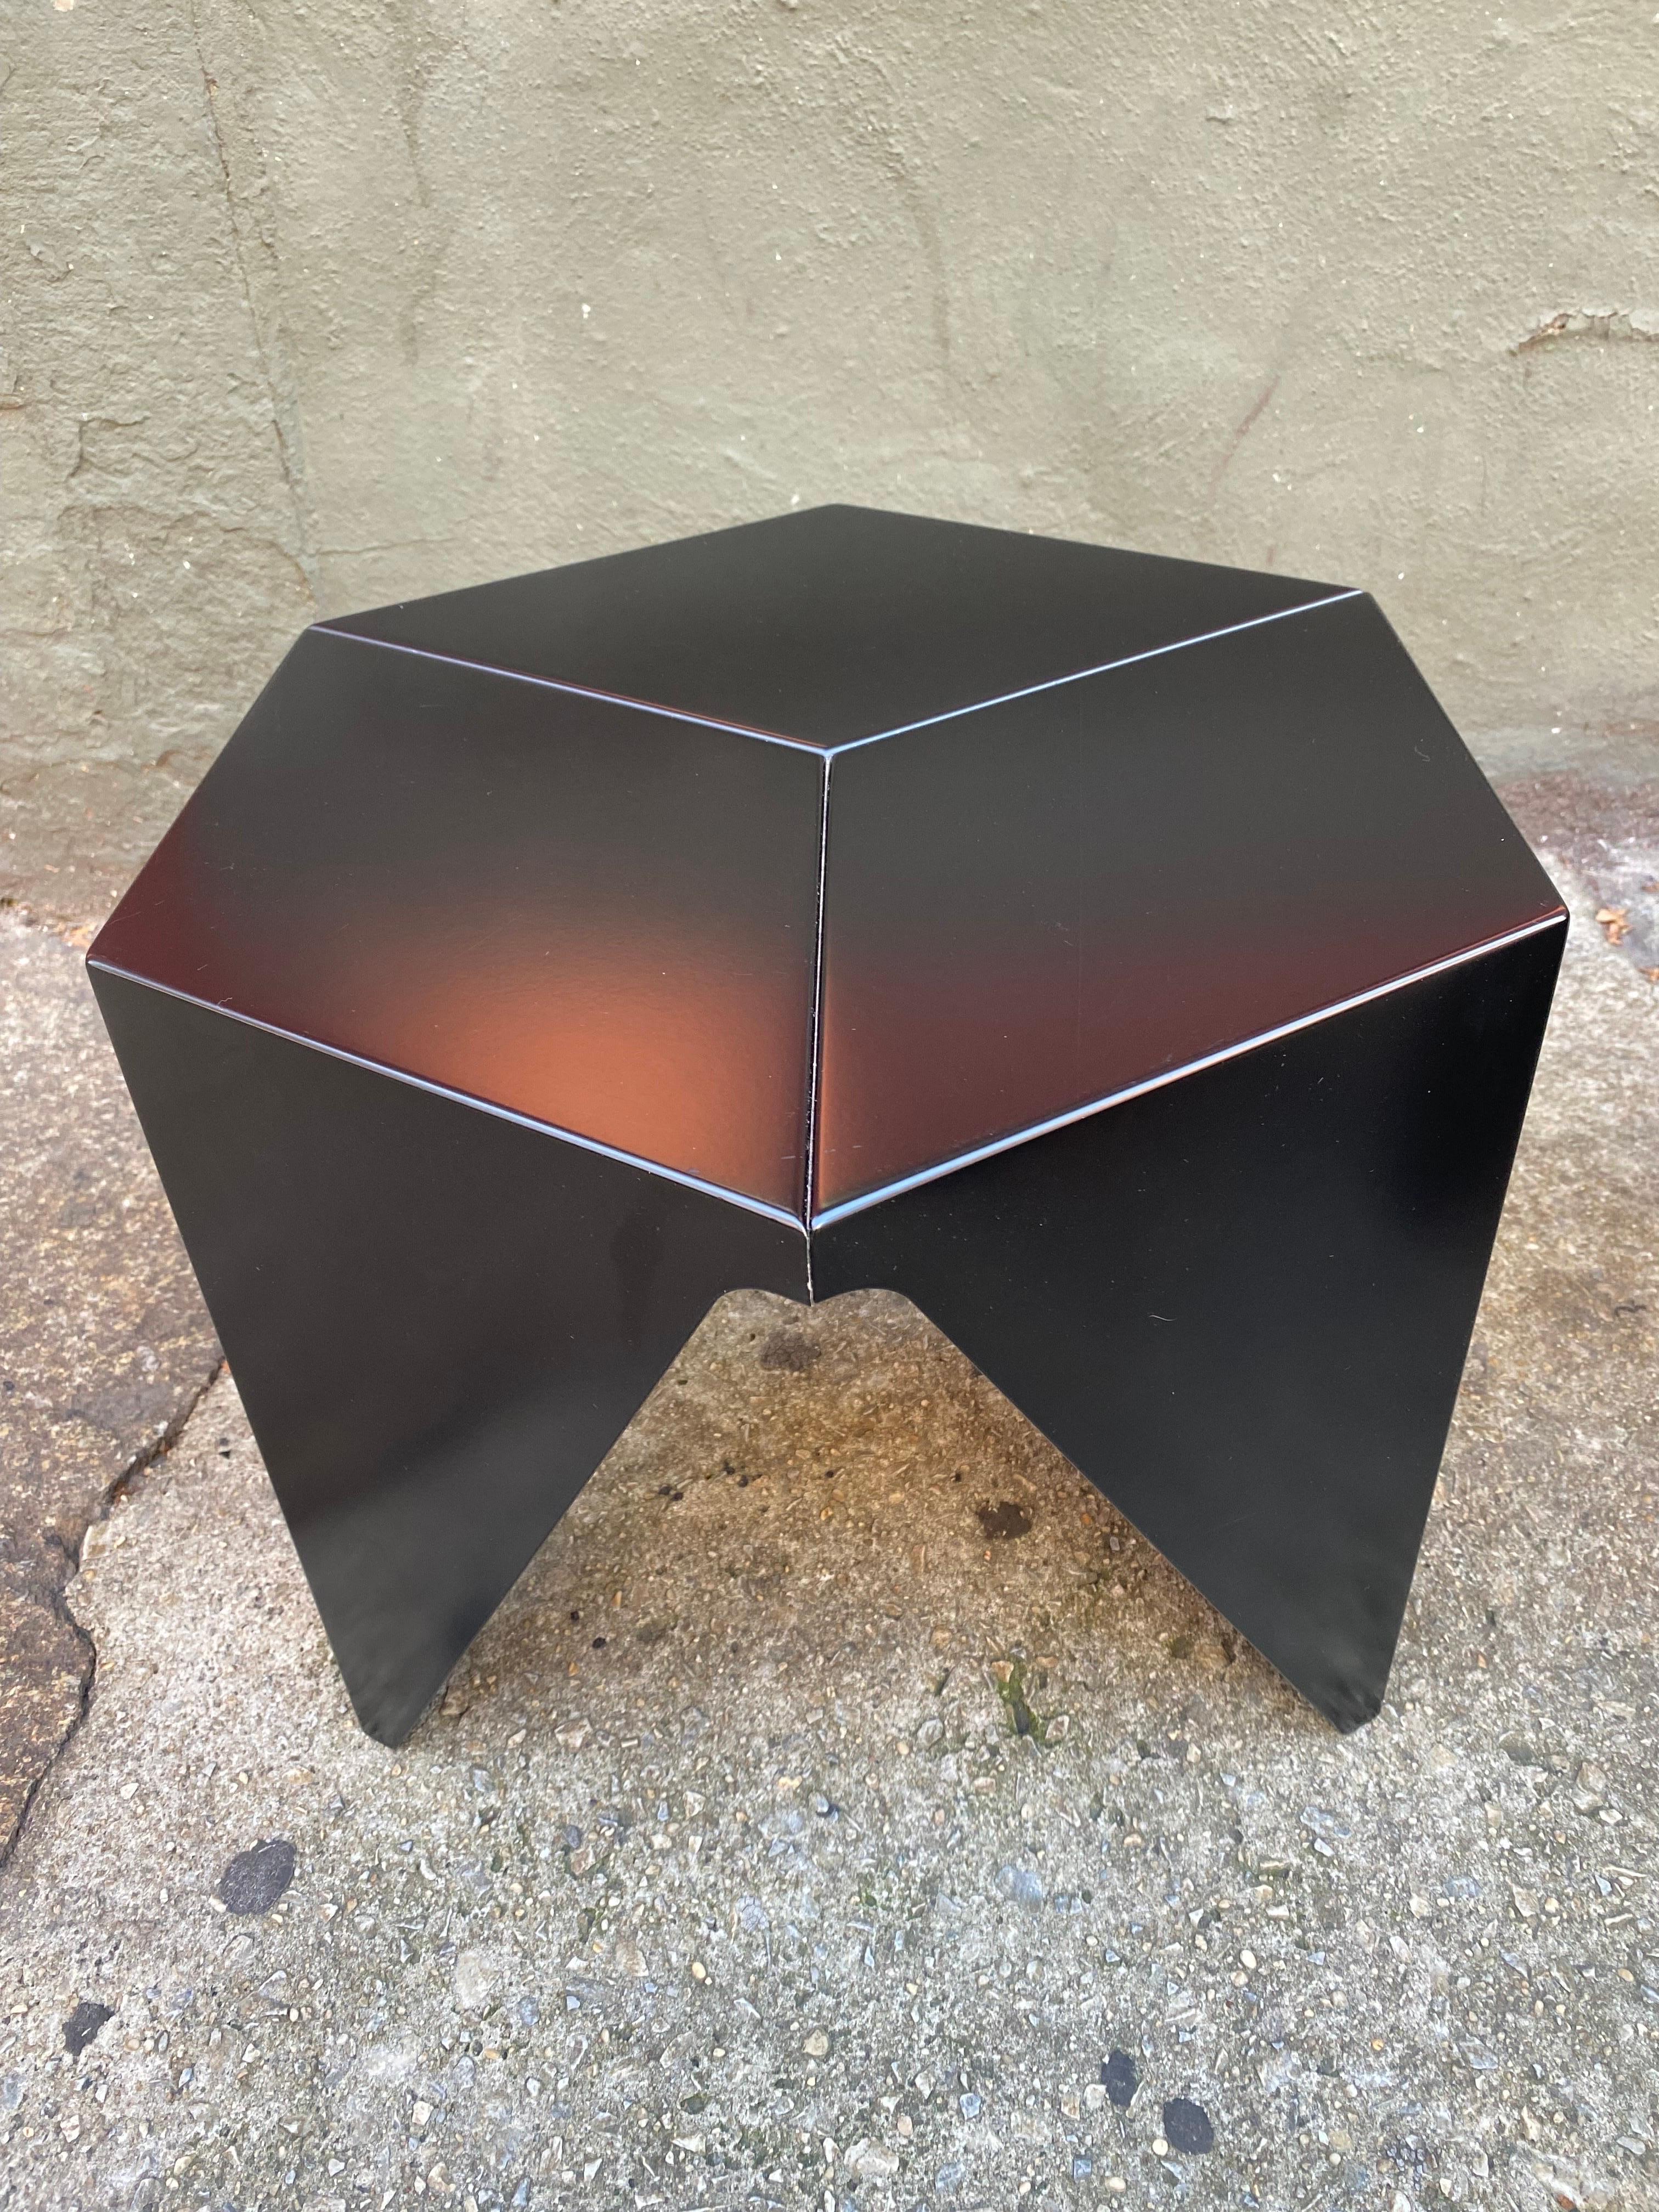 Noguchi Prismatic Tables for Vitra, 2 Available, priced separately! For Sale 2